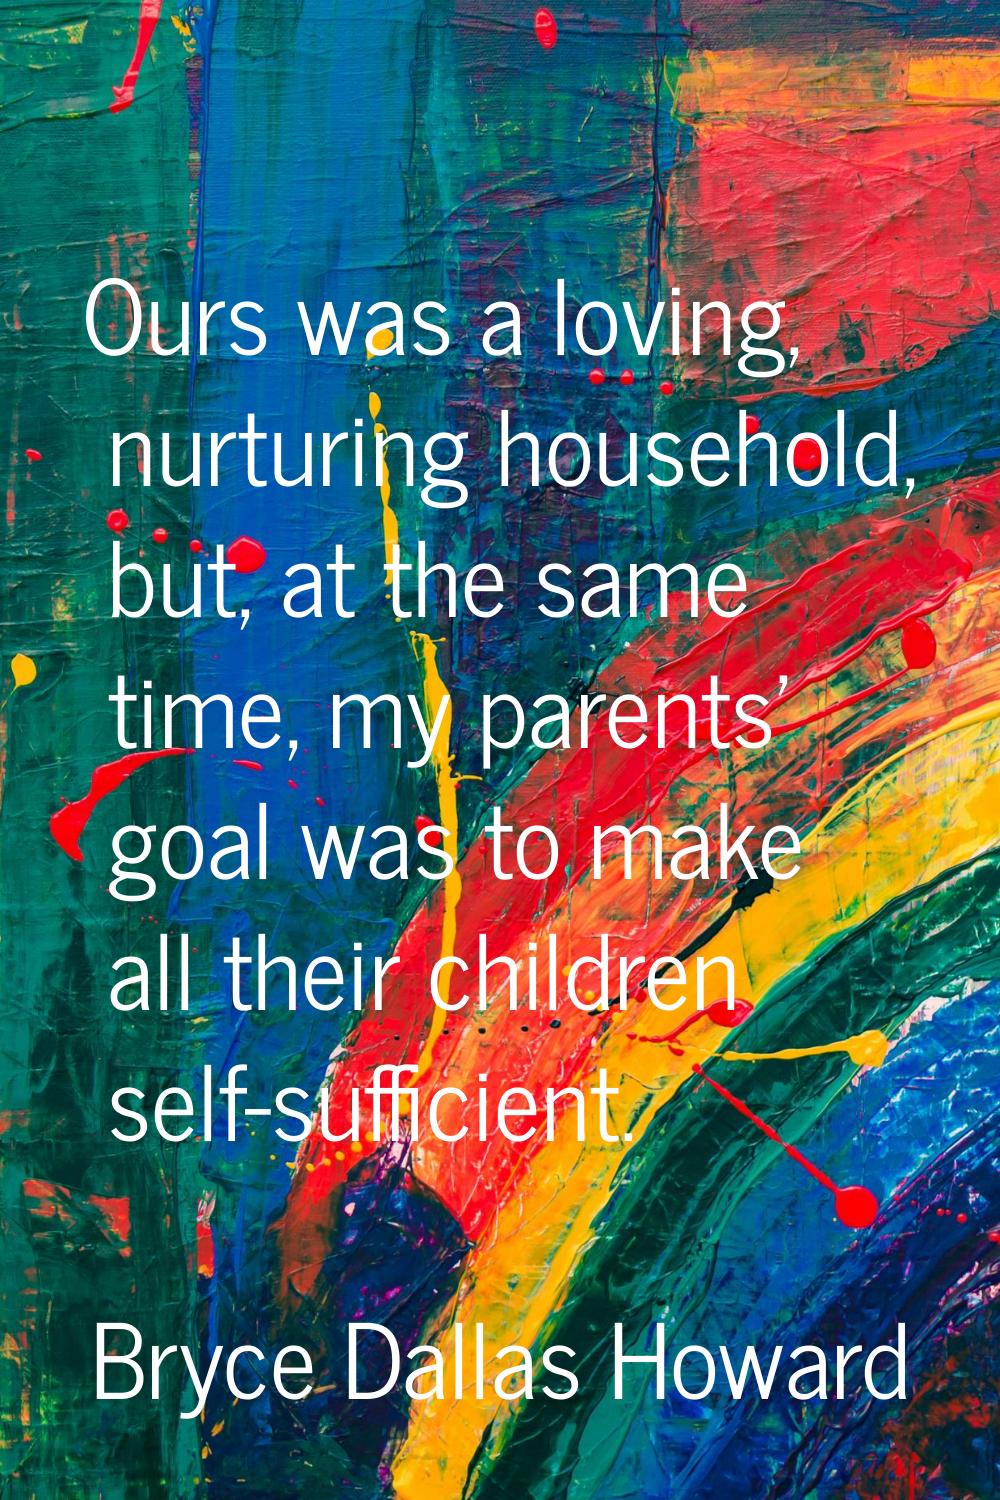 Ours was a loving, nurturing household, but, at the same time, my parents' goal was to make all the